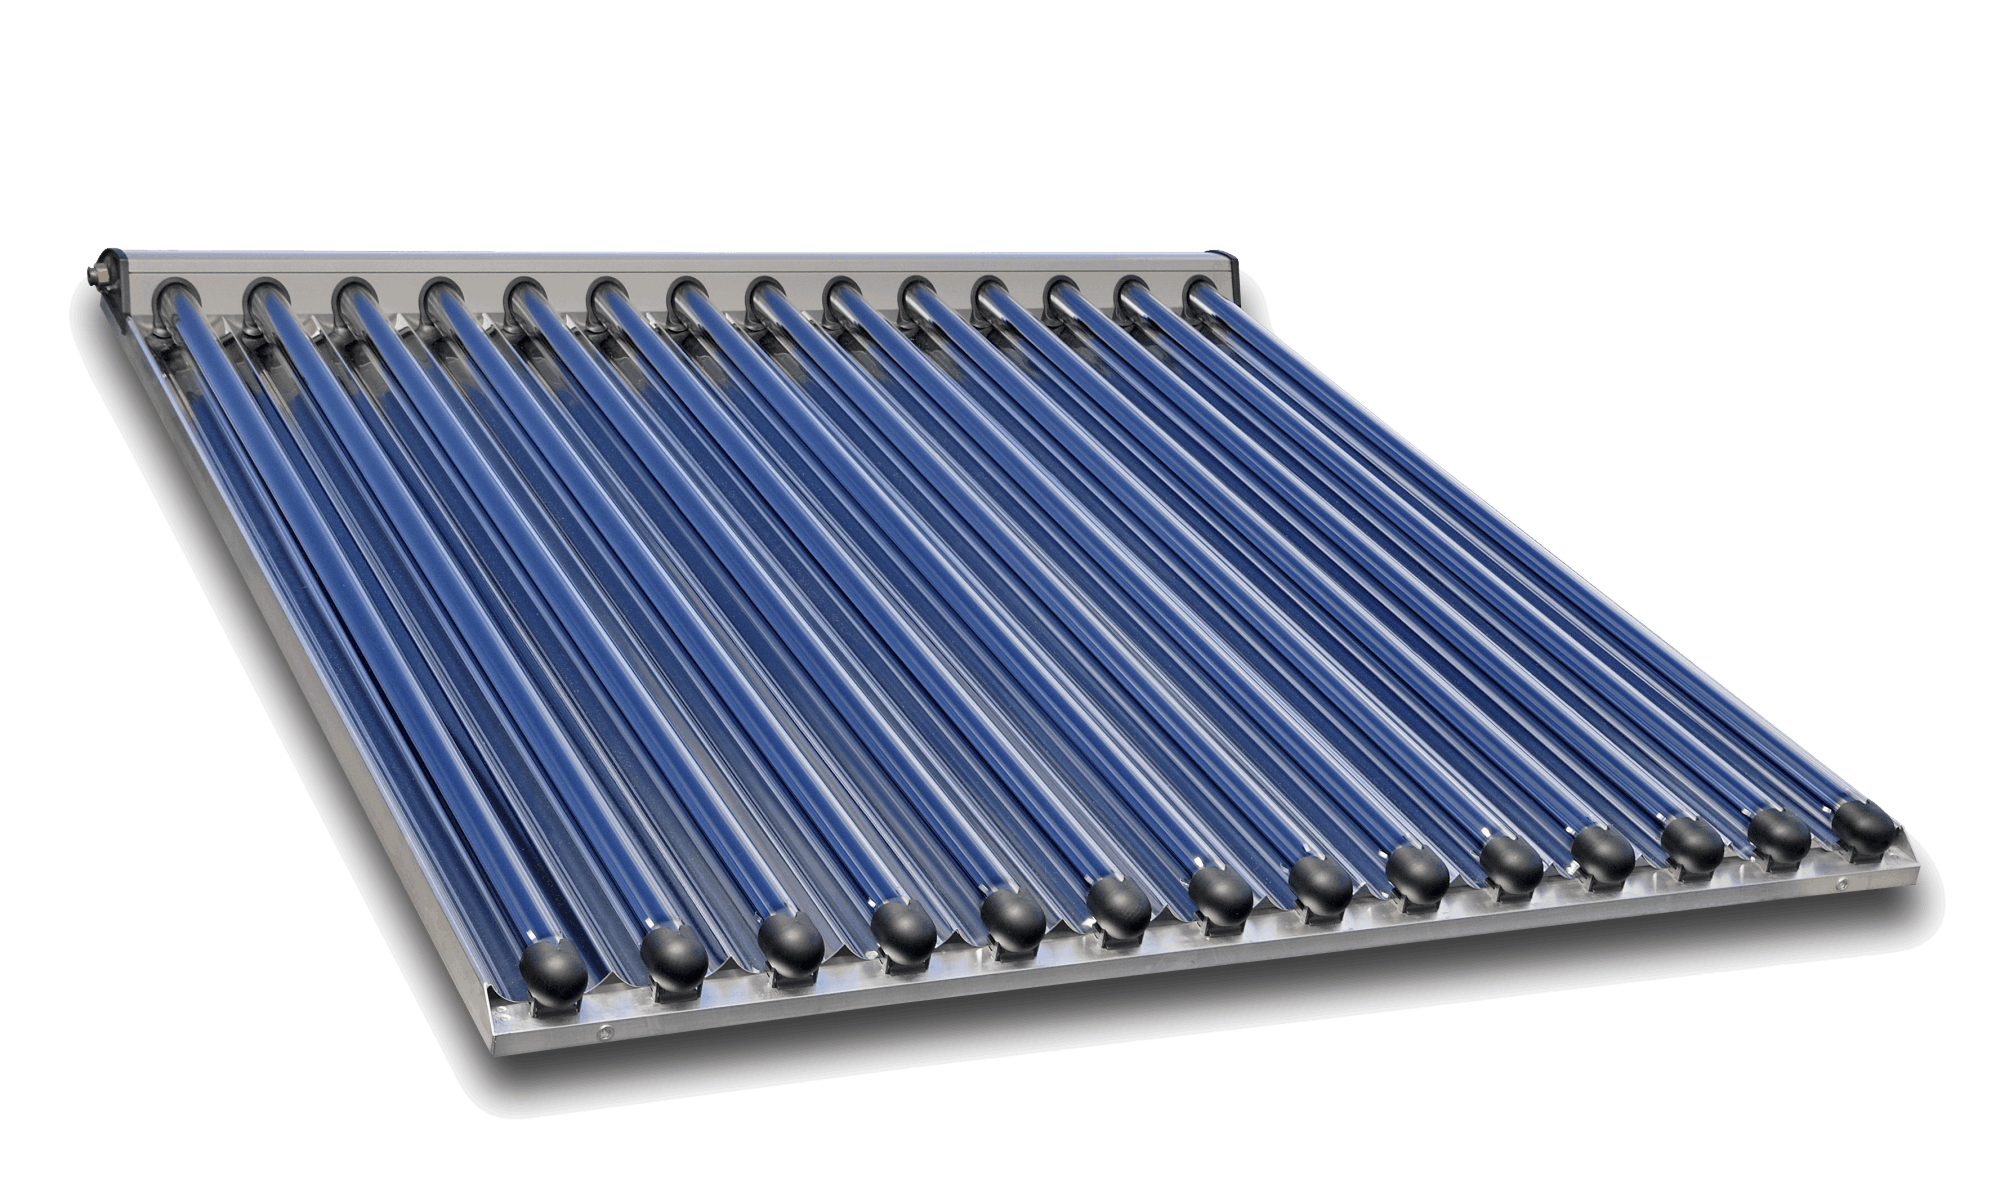 Solar heating discussion